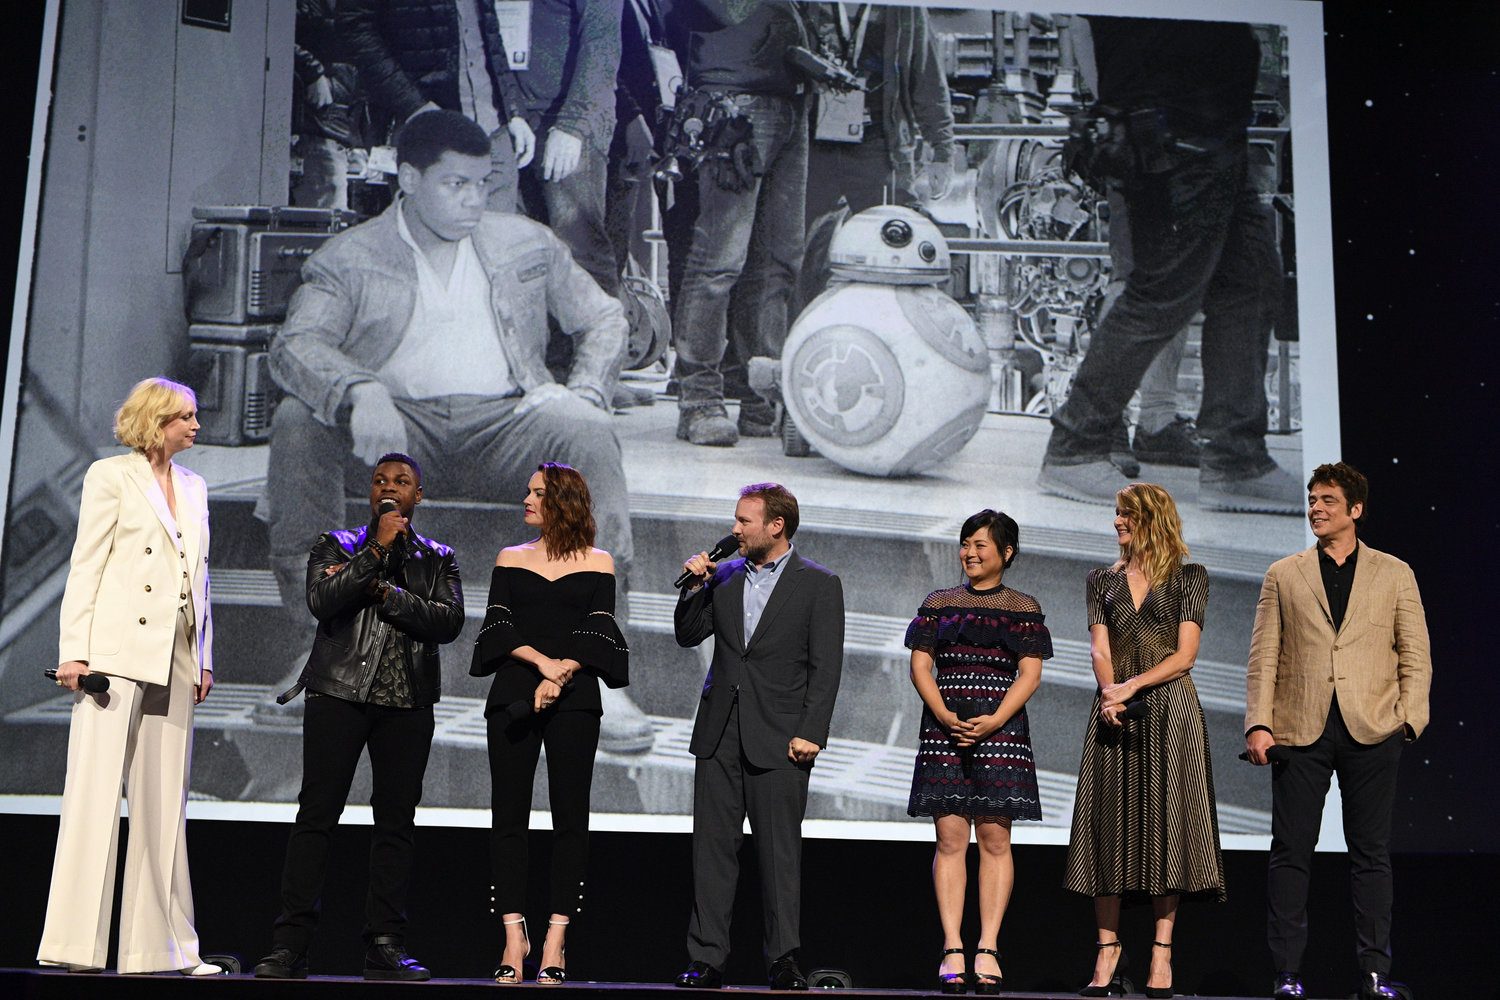 'THE LAST JEDI.' The cast of 'Star Wars: The Last Jedi' takes the stage at D23 Expo 2017. From left to right: Gwendoline Christie, John Boyega, Daisy Ridley, director Rian Johnson, Kelly Marie Tran, Laura Dern, and Benicio del Toro. Photo by Disney/Image Group LA 